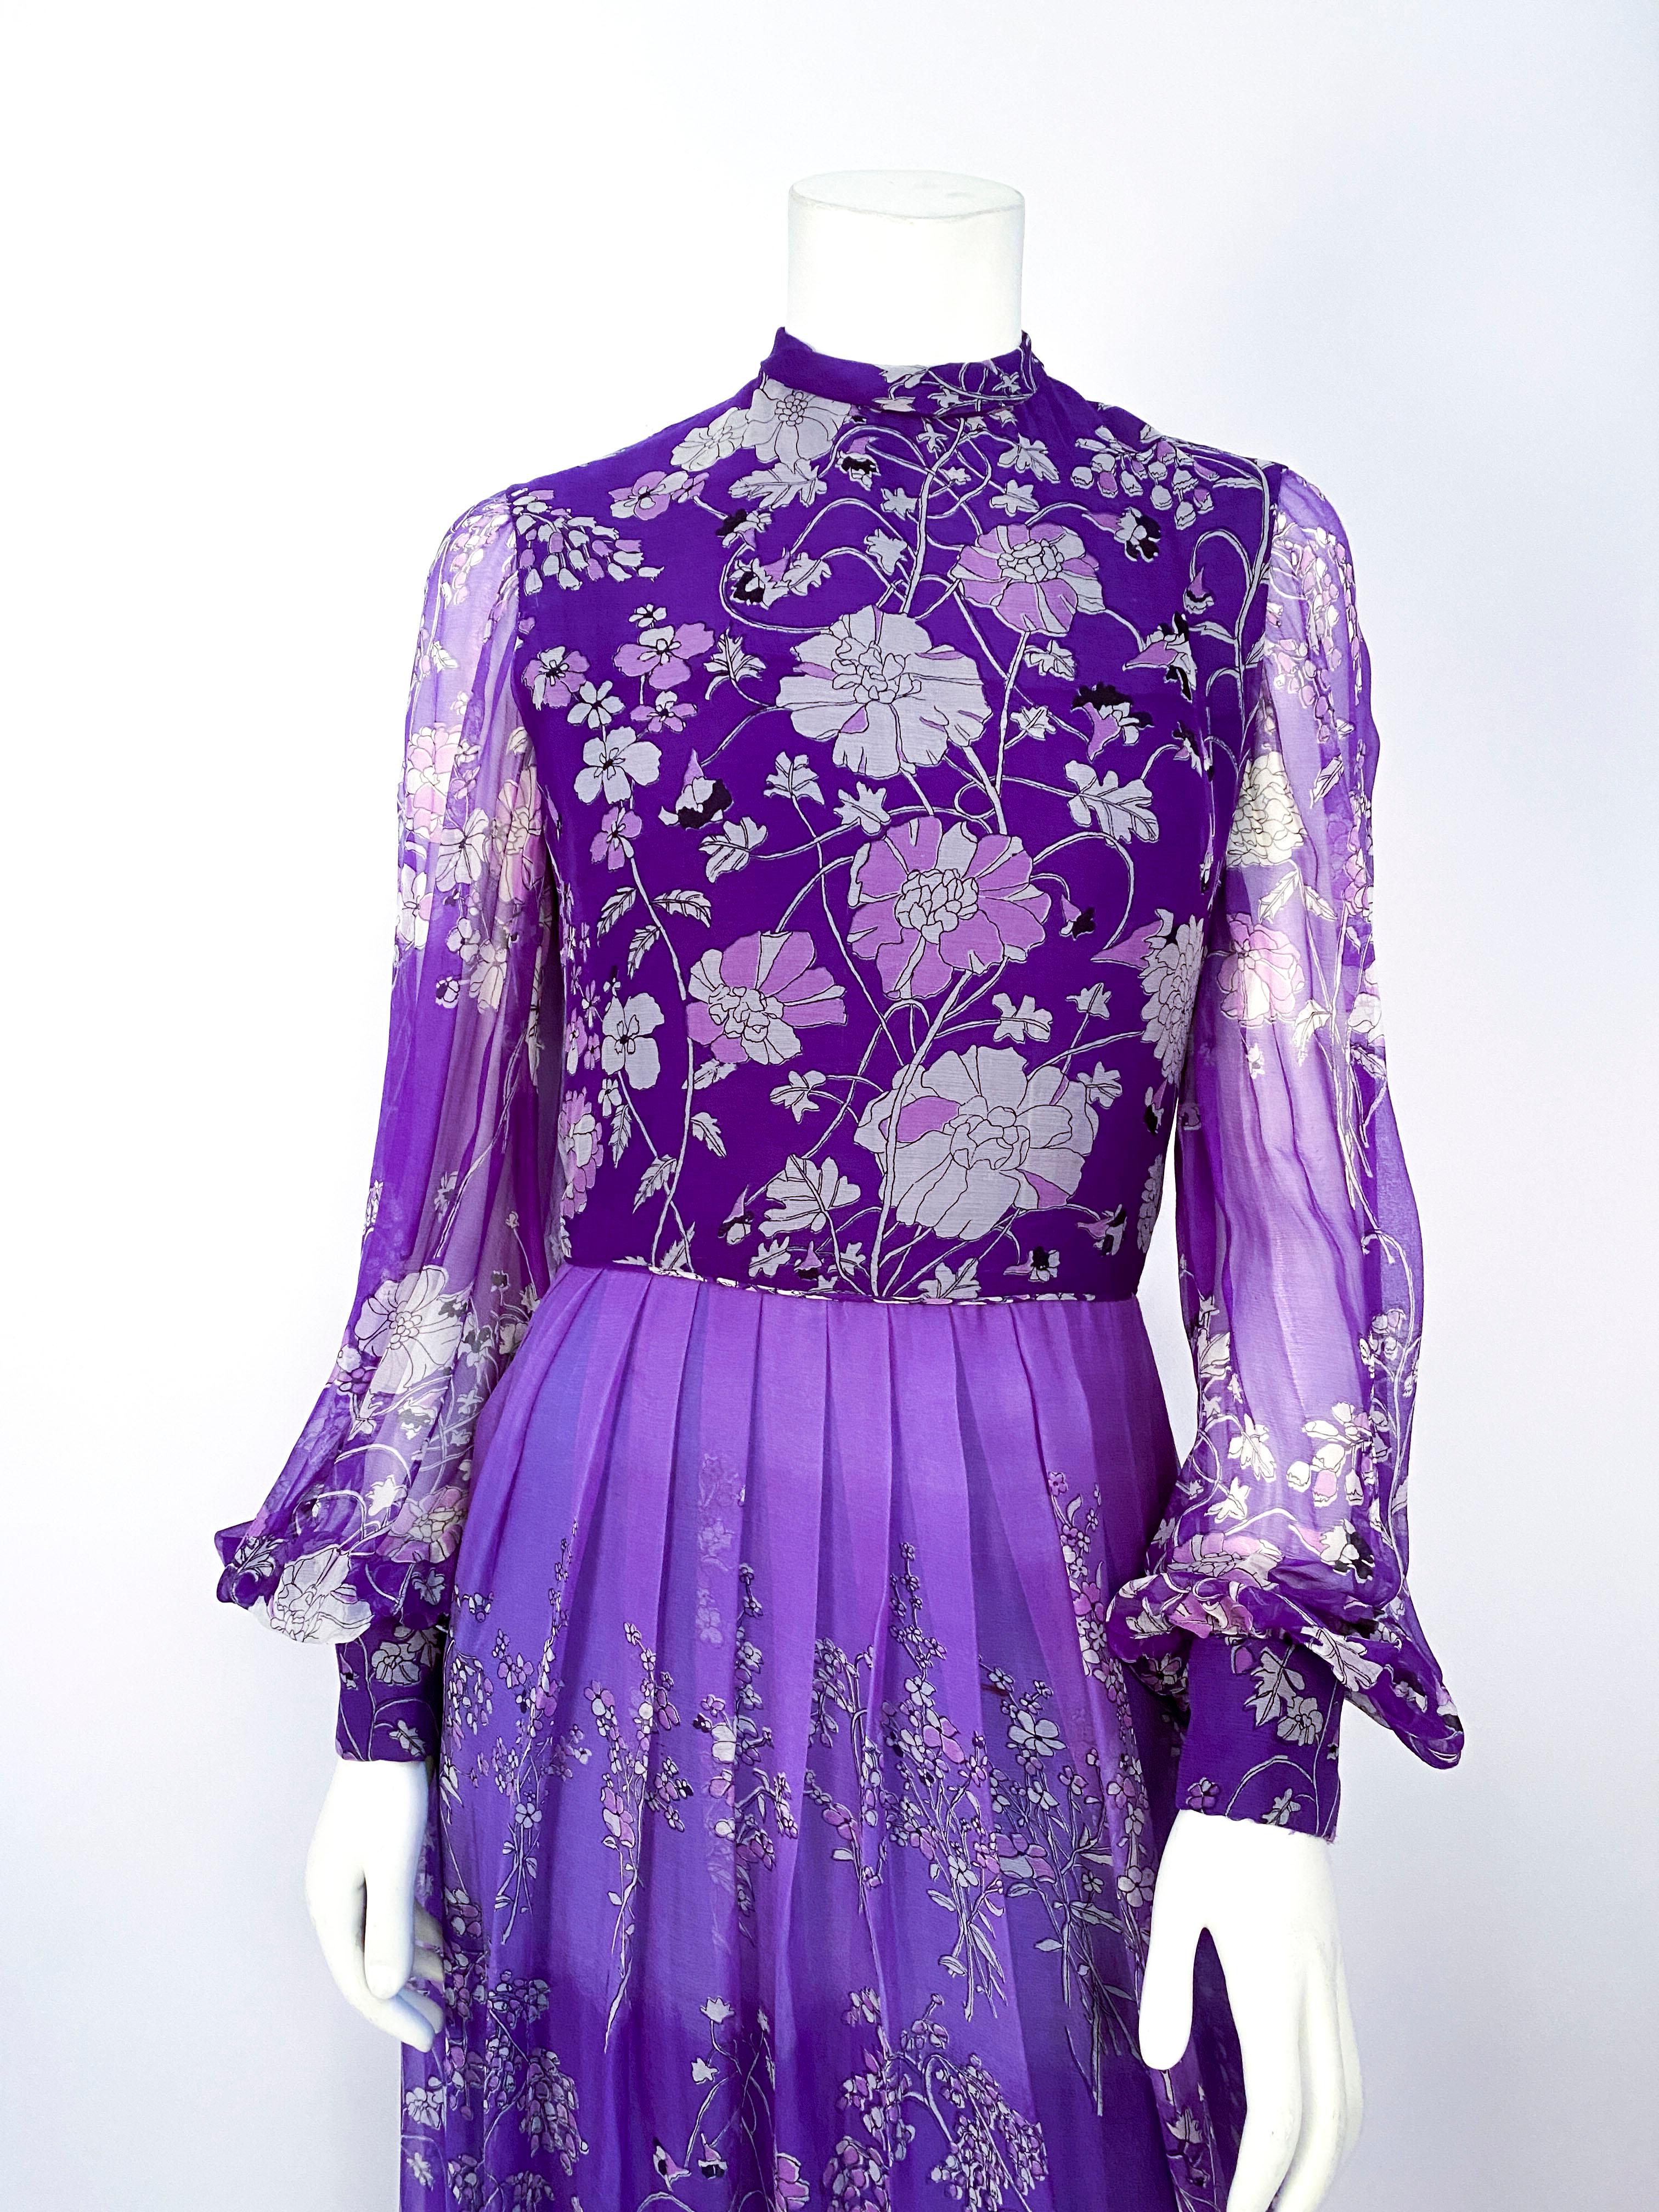 1970s purple psychedelic floral printed dress made of a fine silk chiffon. The full length skirt is custom died with a lavender to violet ombre effect --the rayon lining is two-toned to enhance the ombre coloring. The bishop sleeves are transparent